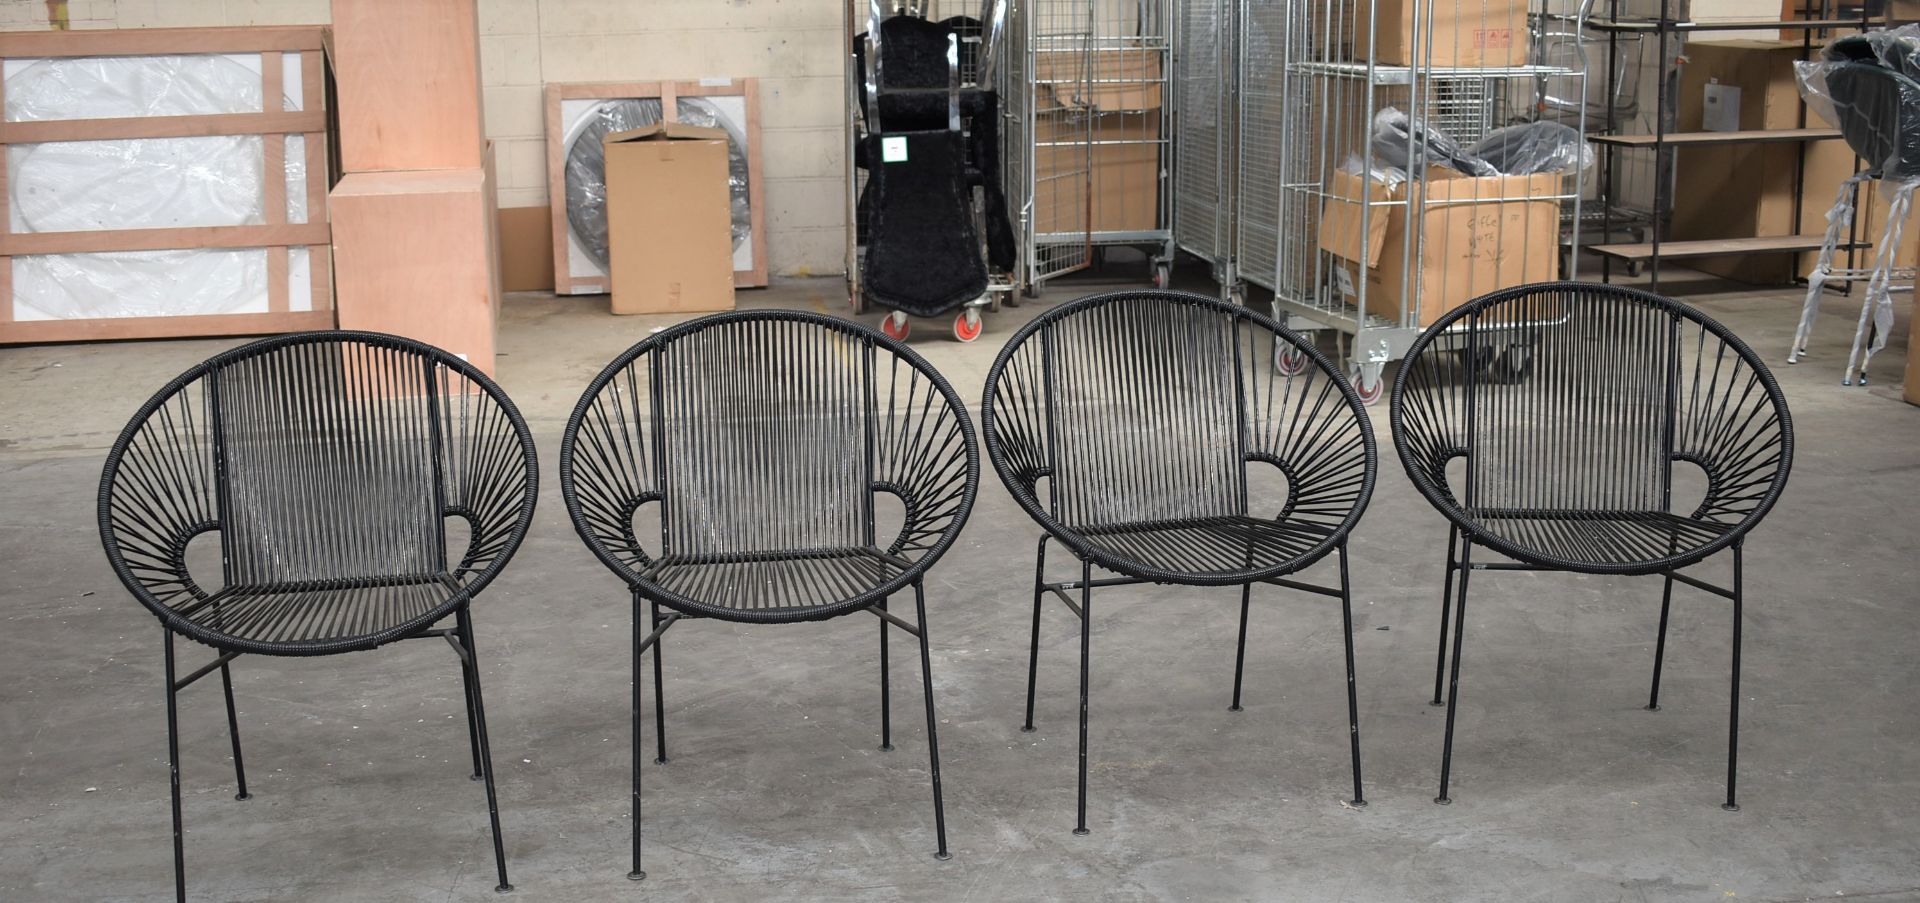 4 x Innit Designer Chairs - Acapulco Style Chairs in Black Suitable For Indoor or Outdoor Use - - Image 3 of 11